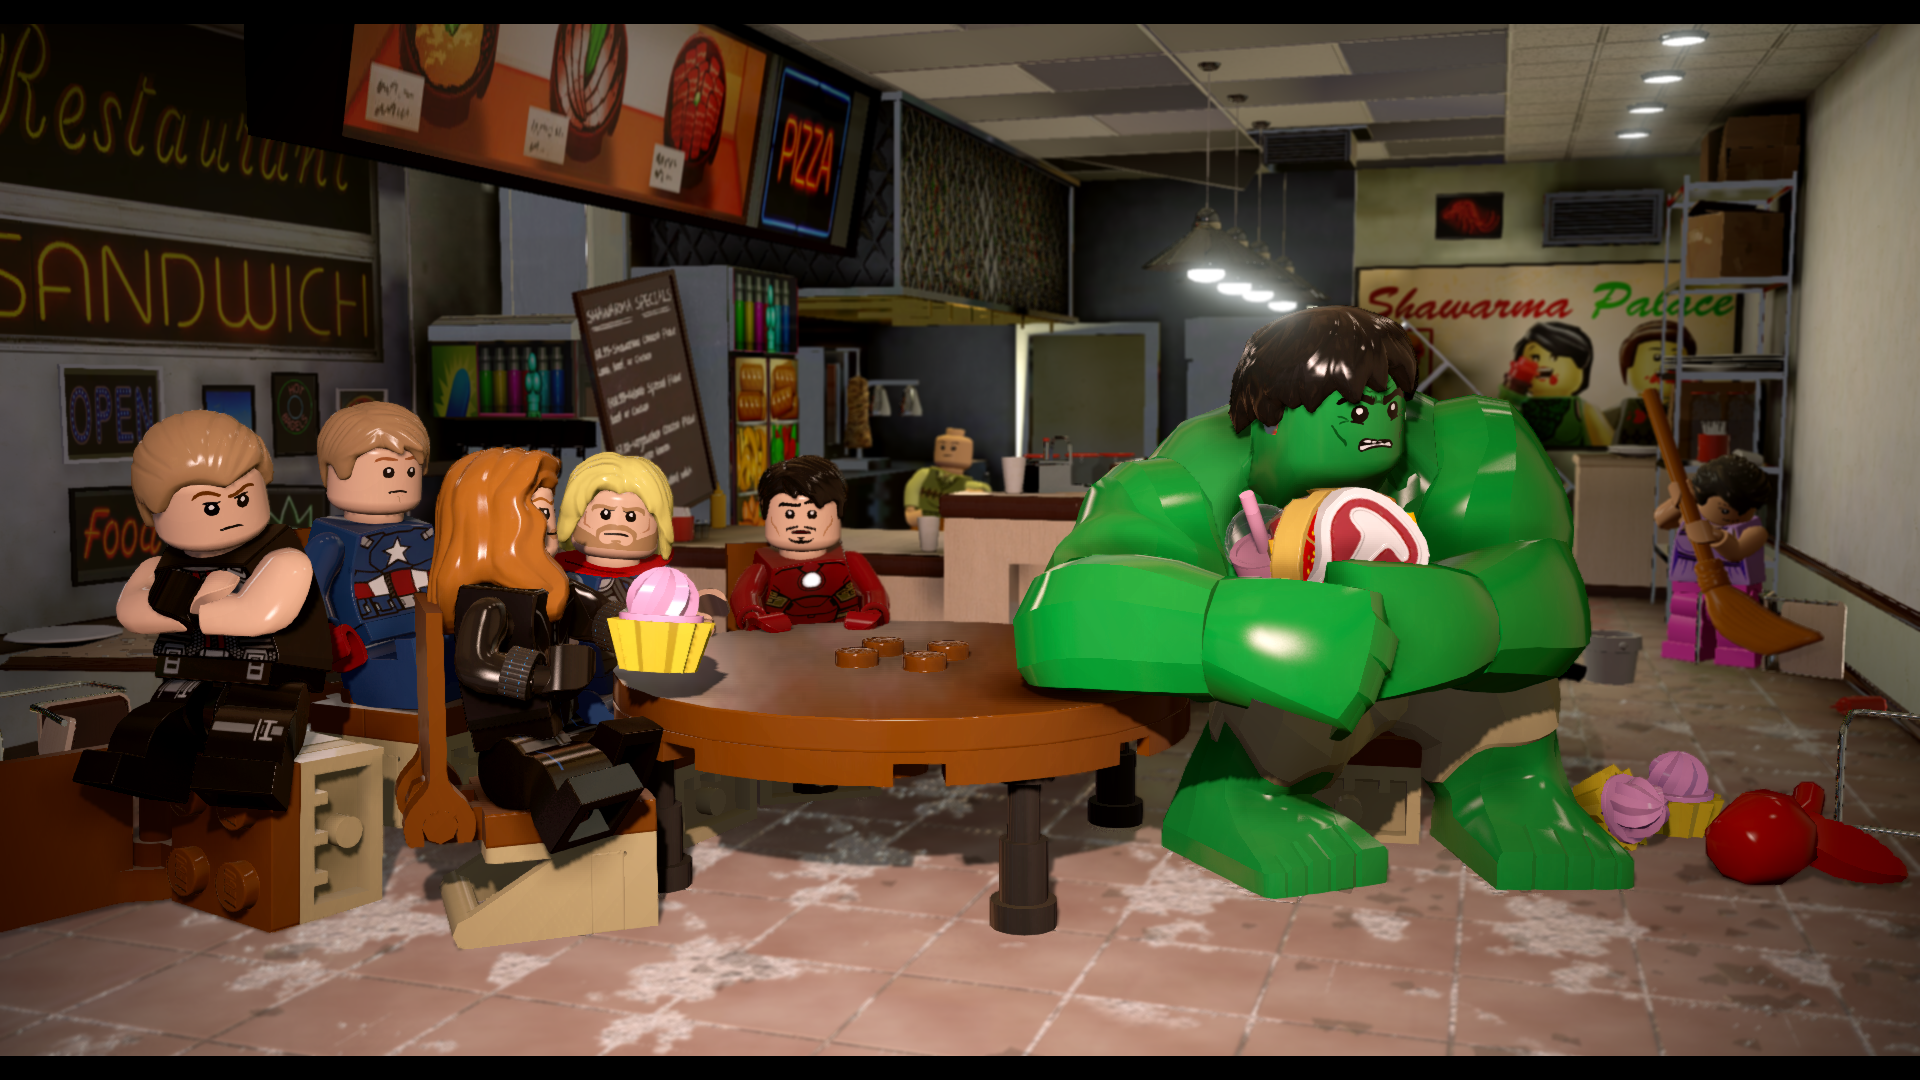 download lego marvels avengers game for free